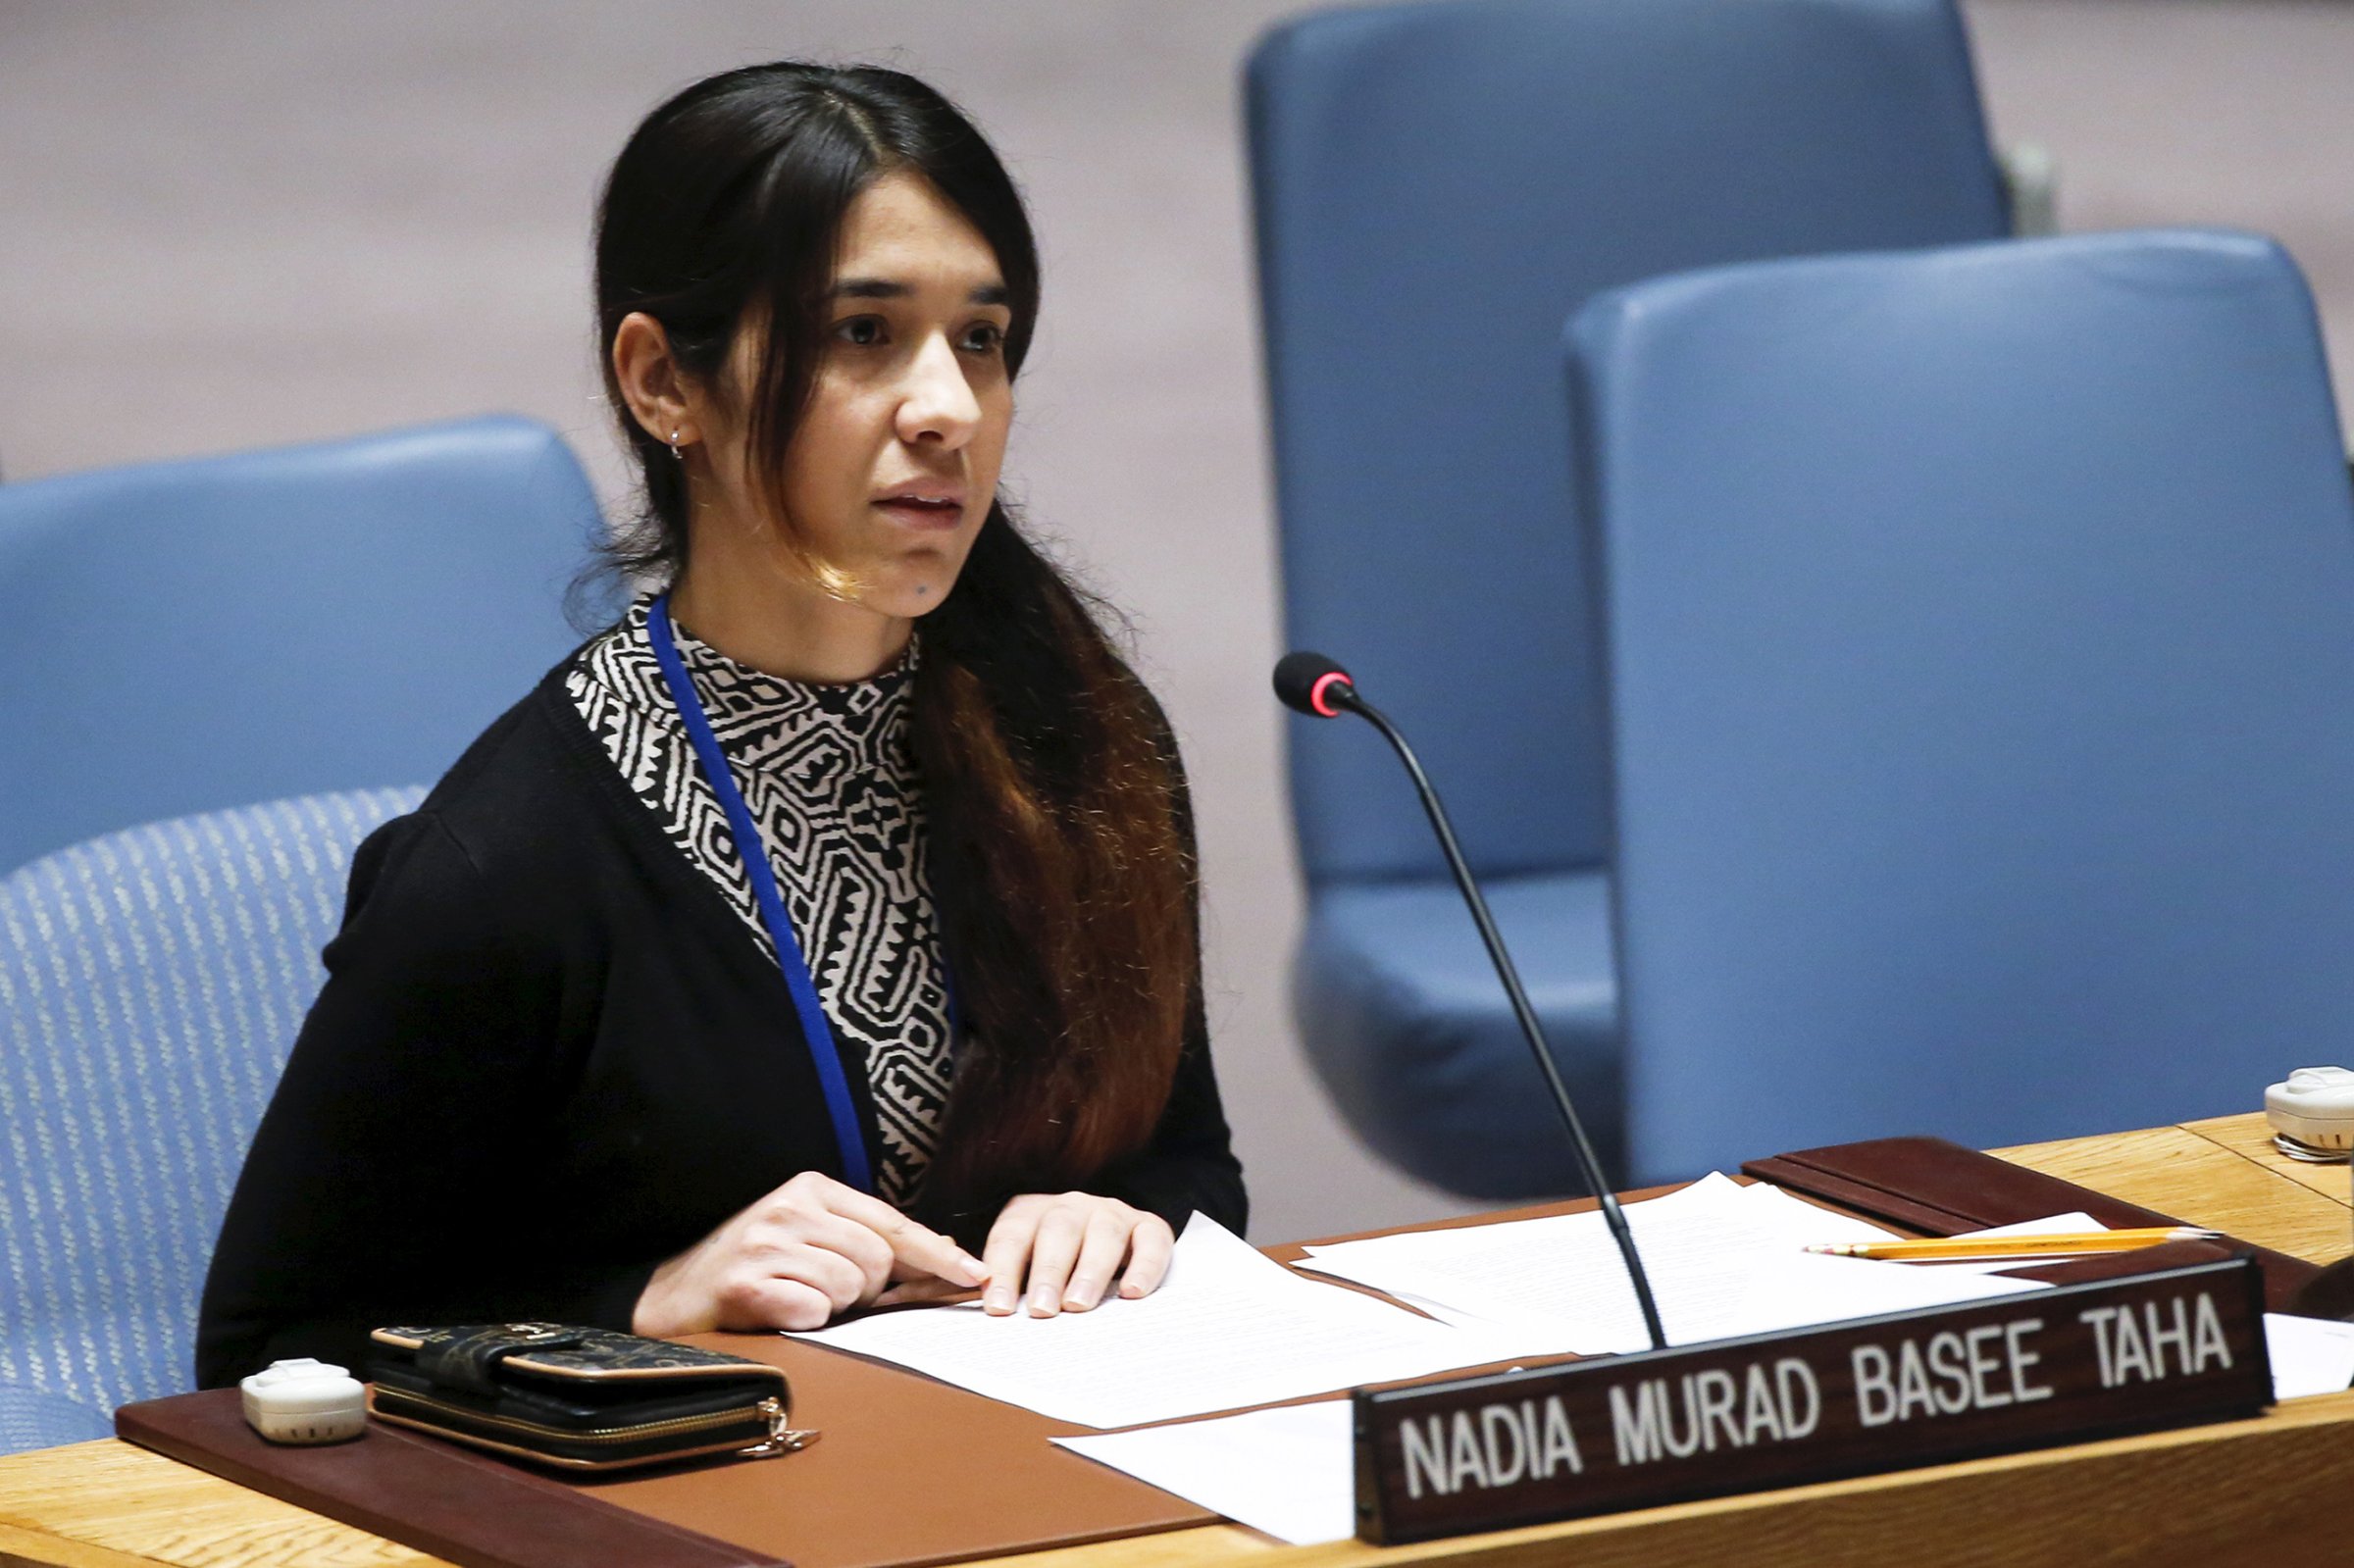 Nadia Murad Basee Taha, a 21-year-old Iraqi woman of the Yezidi minority, speaks to members of the Security Council during a meeting at the United Nations headquarters in New York on Dec. 16, 2015.